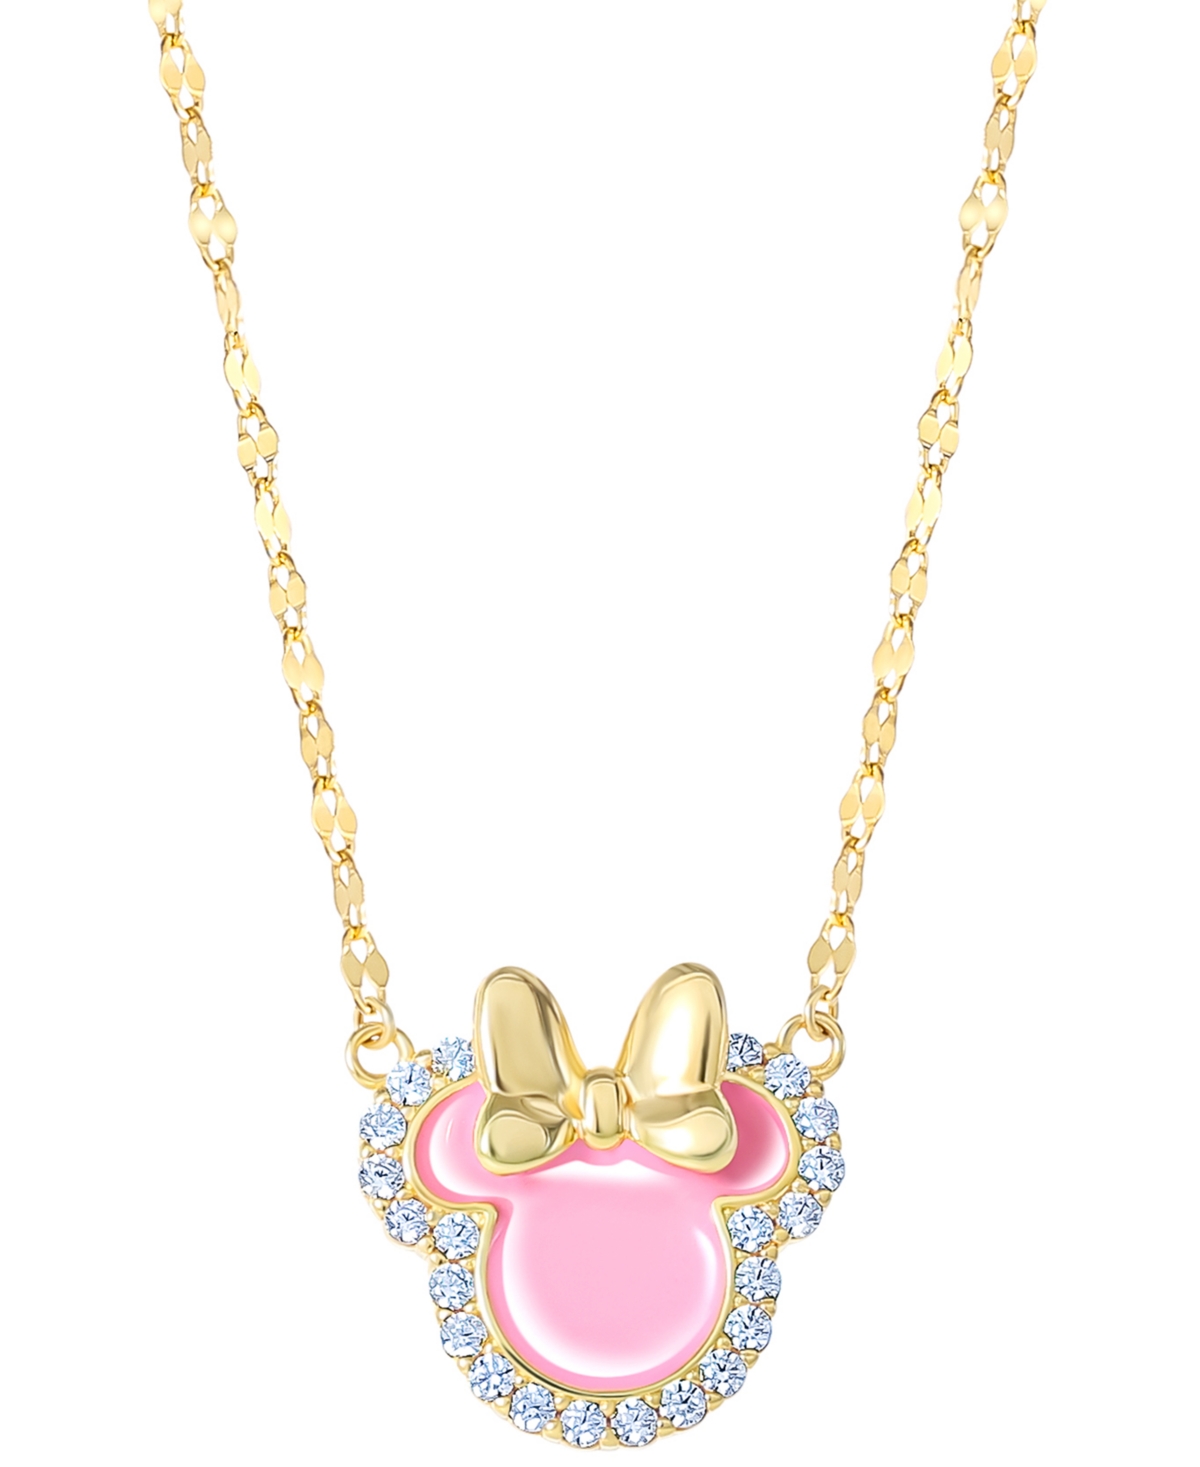 Disney Cubic Zirconia & Pink Enamel Minnie Mouse 18" Pendant Necklace In 18k Gold-plated Sterling Silver In Gold Over Silver